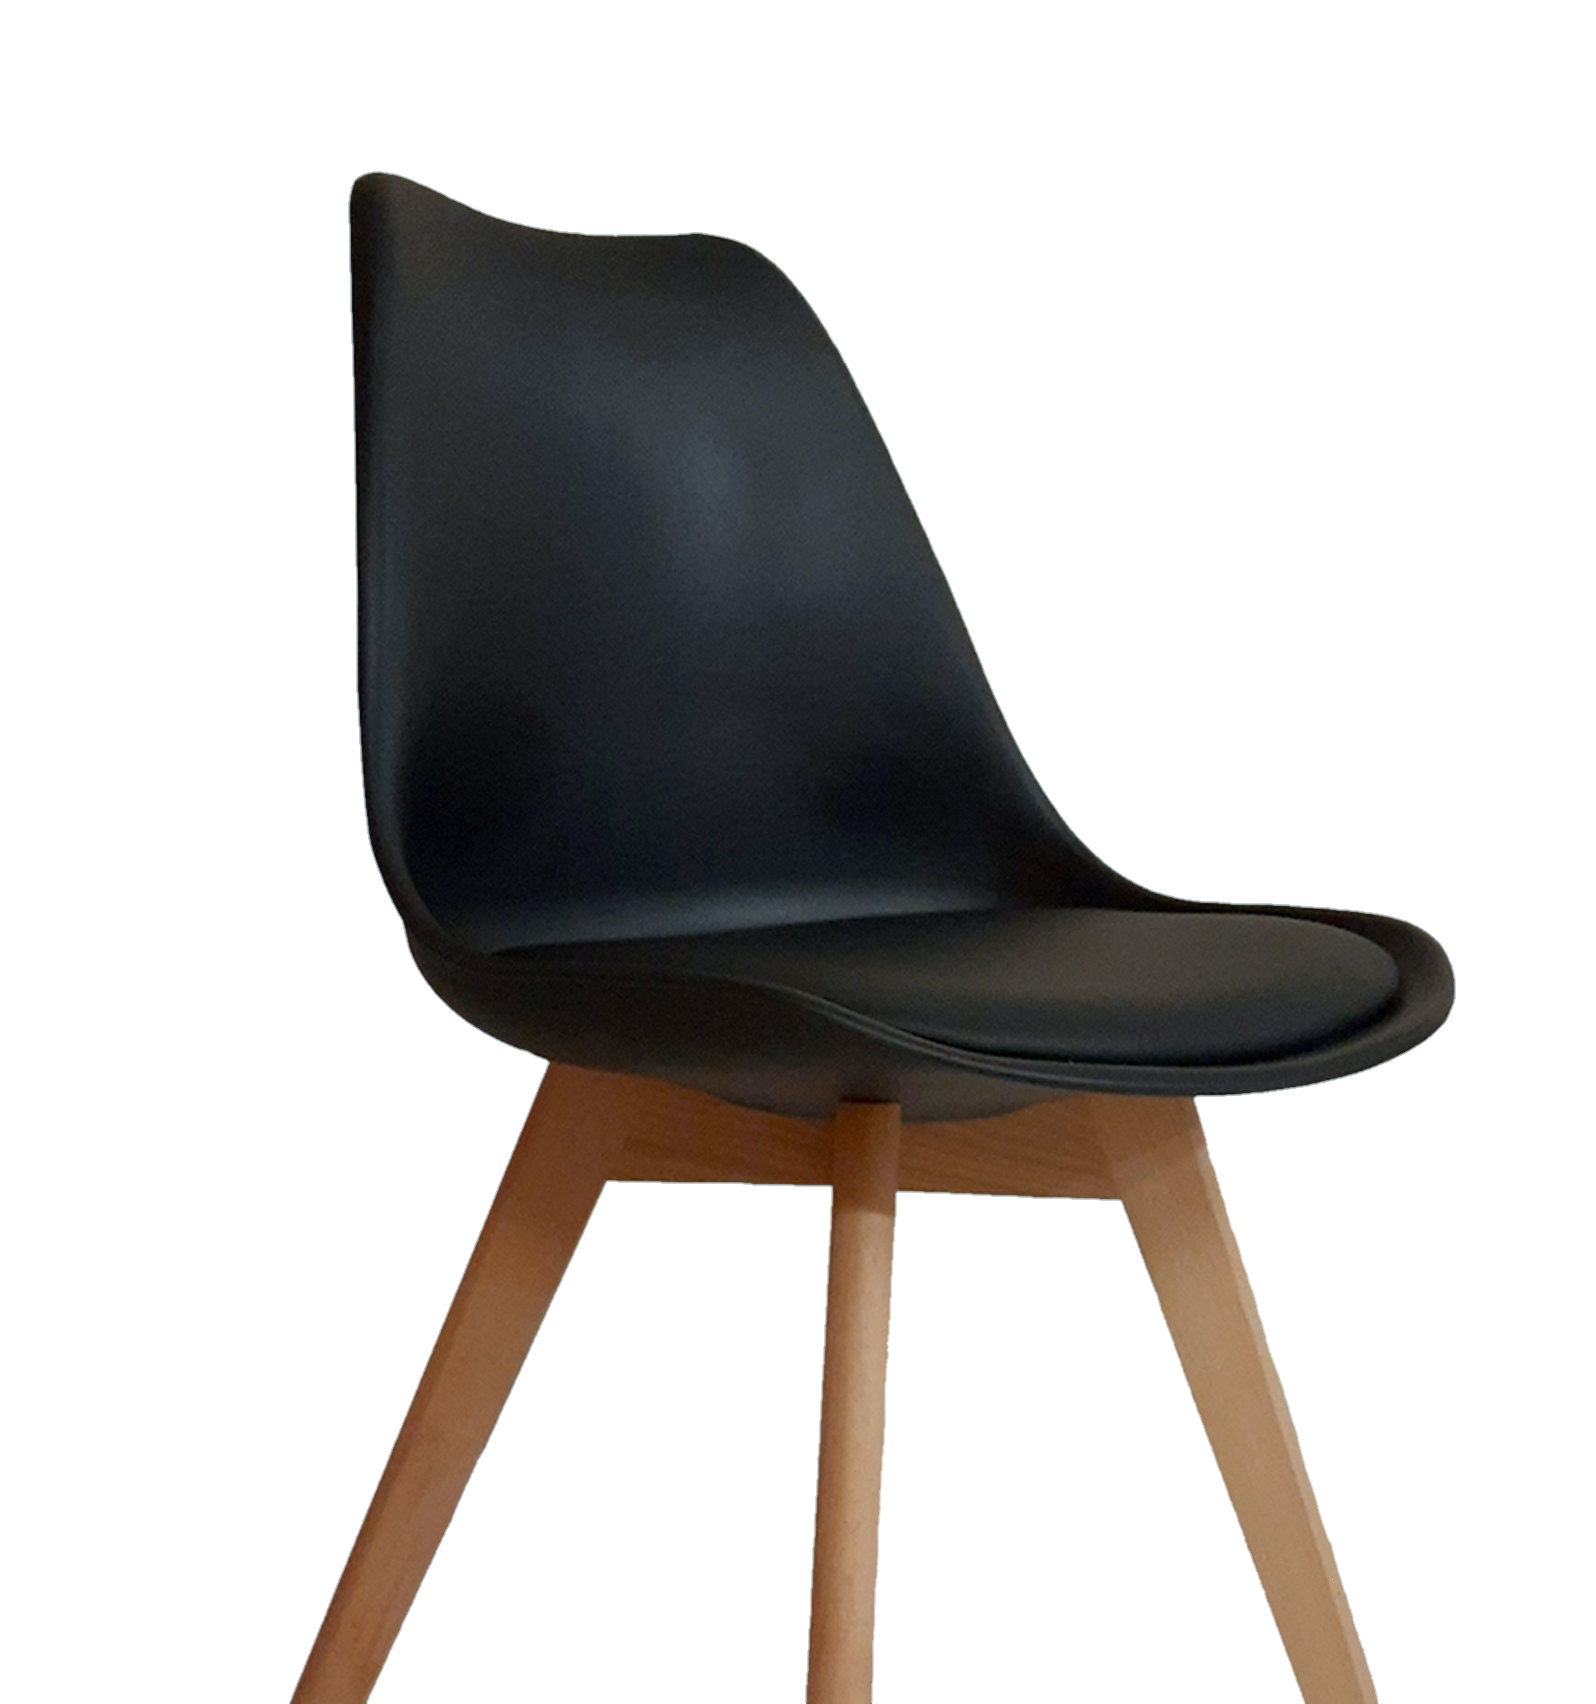 chair-png-image-pngfre-14